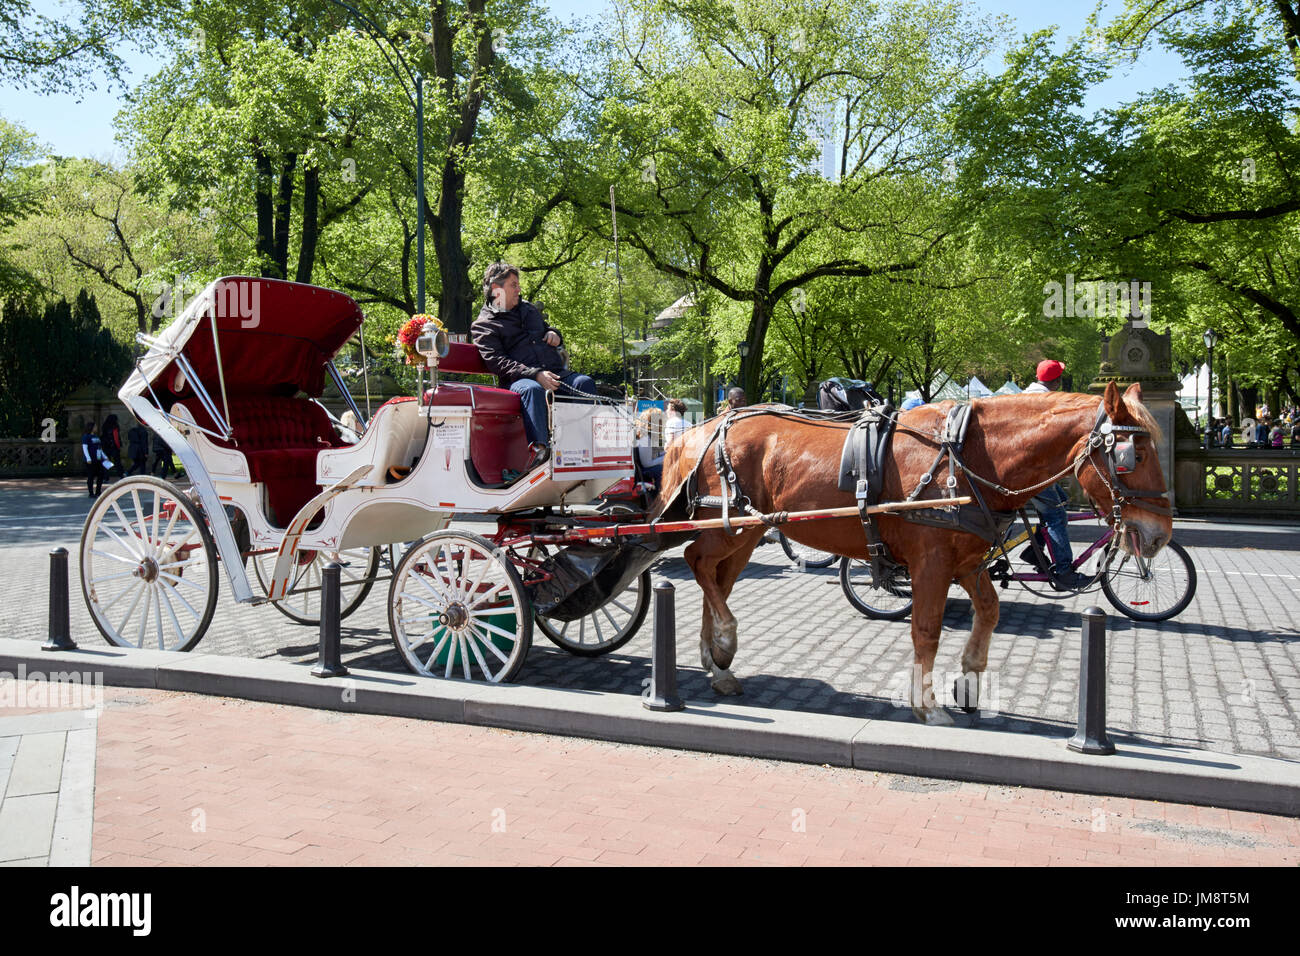 horse and carriage ride waiting for passengers central park New York City USA Stock Photo